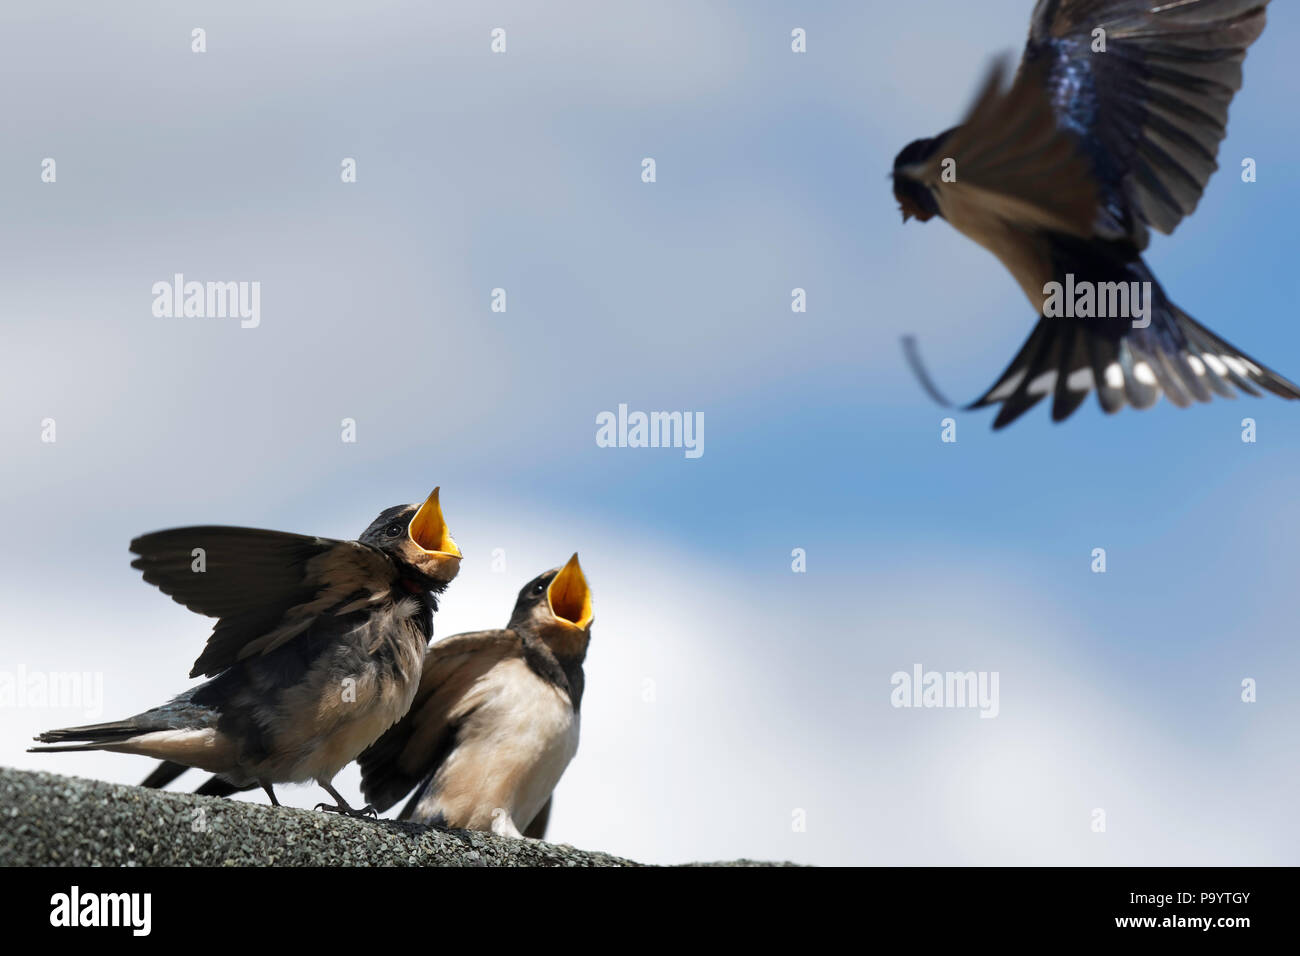 Newly fledged baby swallows begging for food from an adult parent Stock Photo